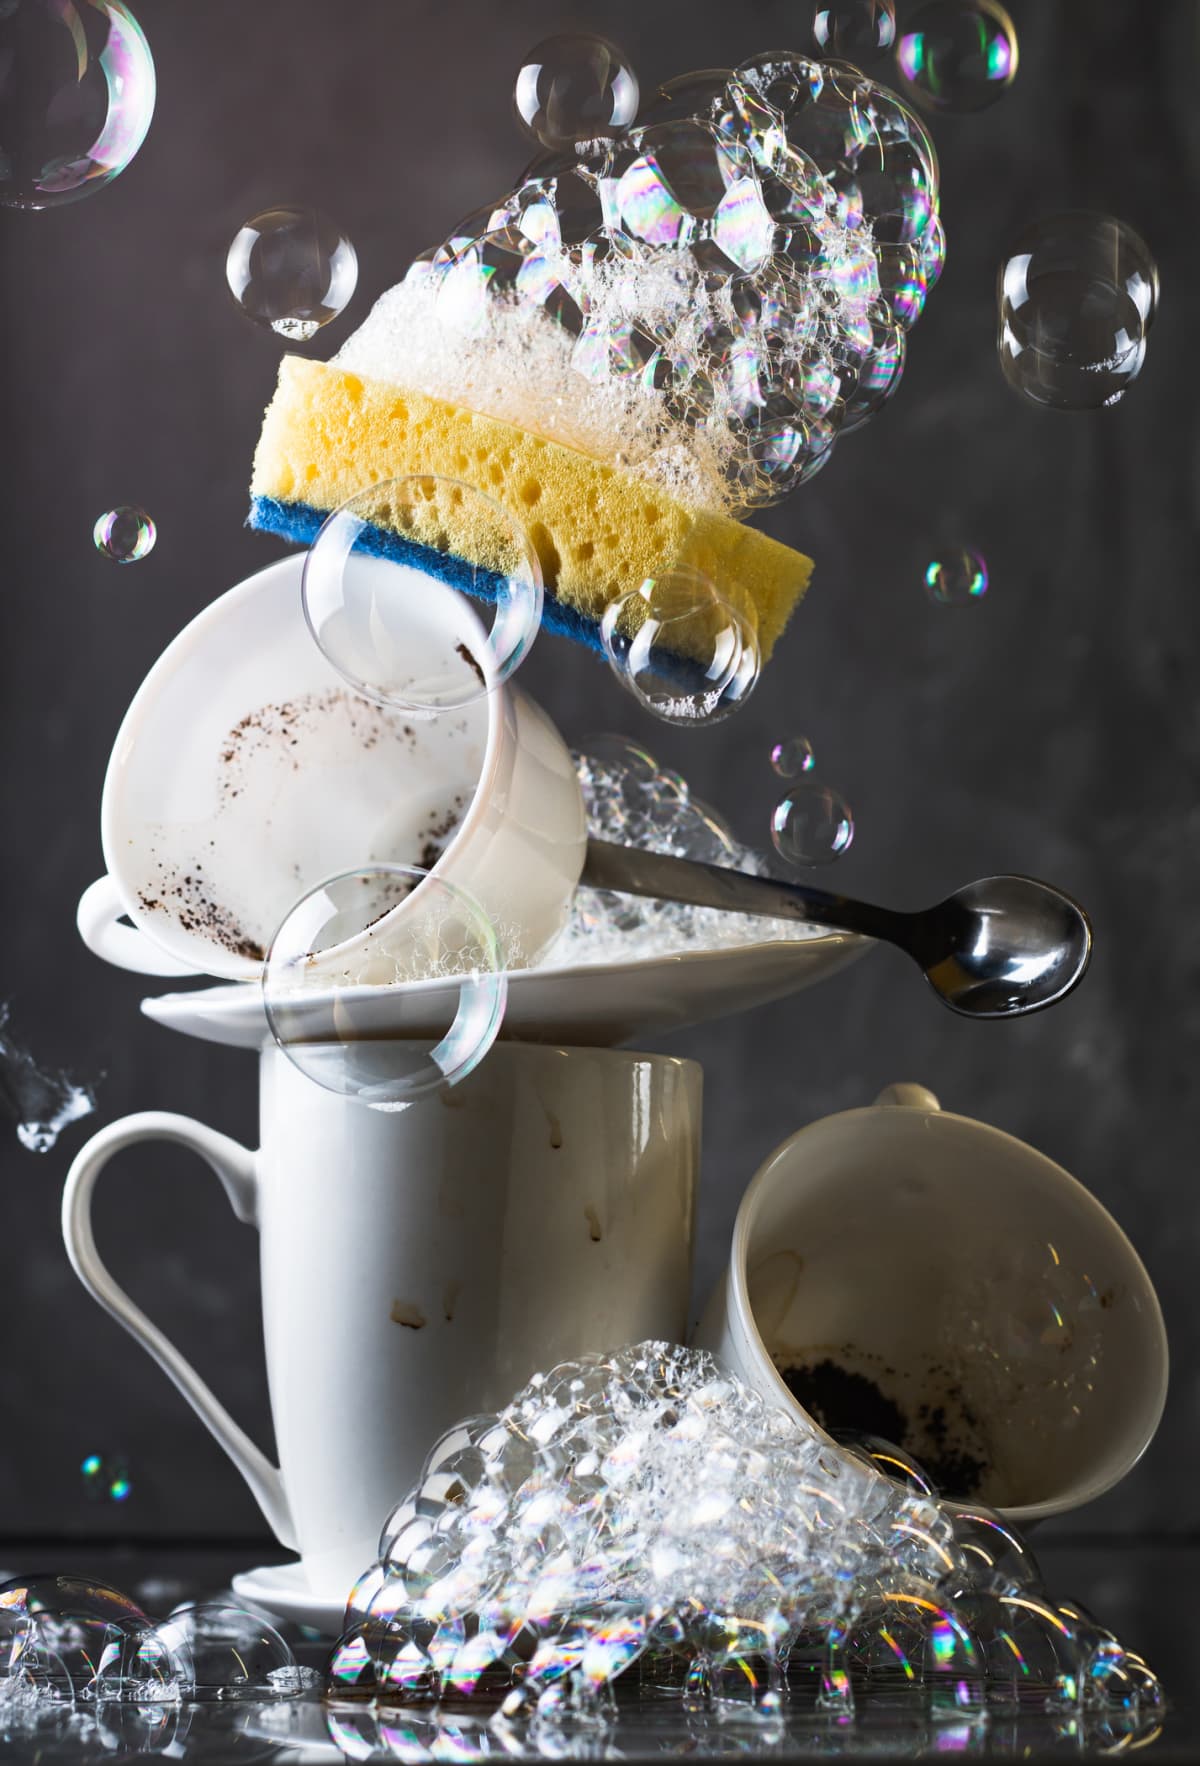 Stack of dirty white dishes on dark background, with washing sponge and bubbles